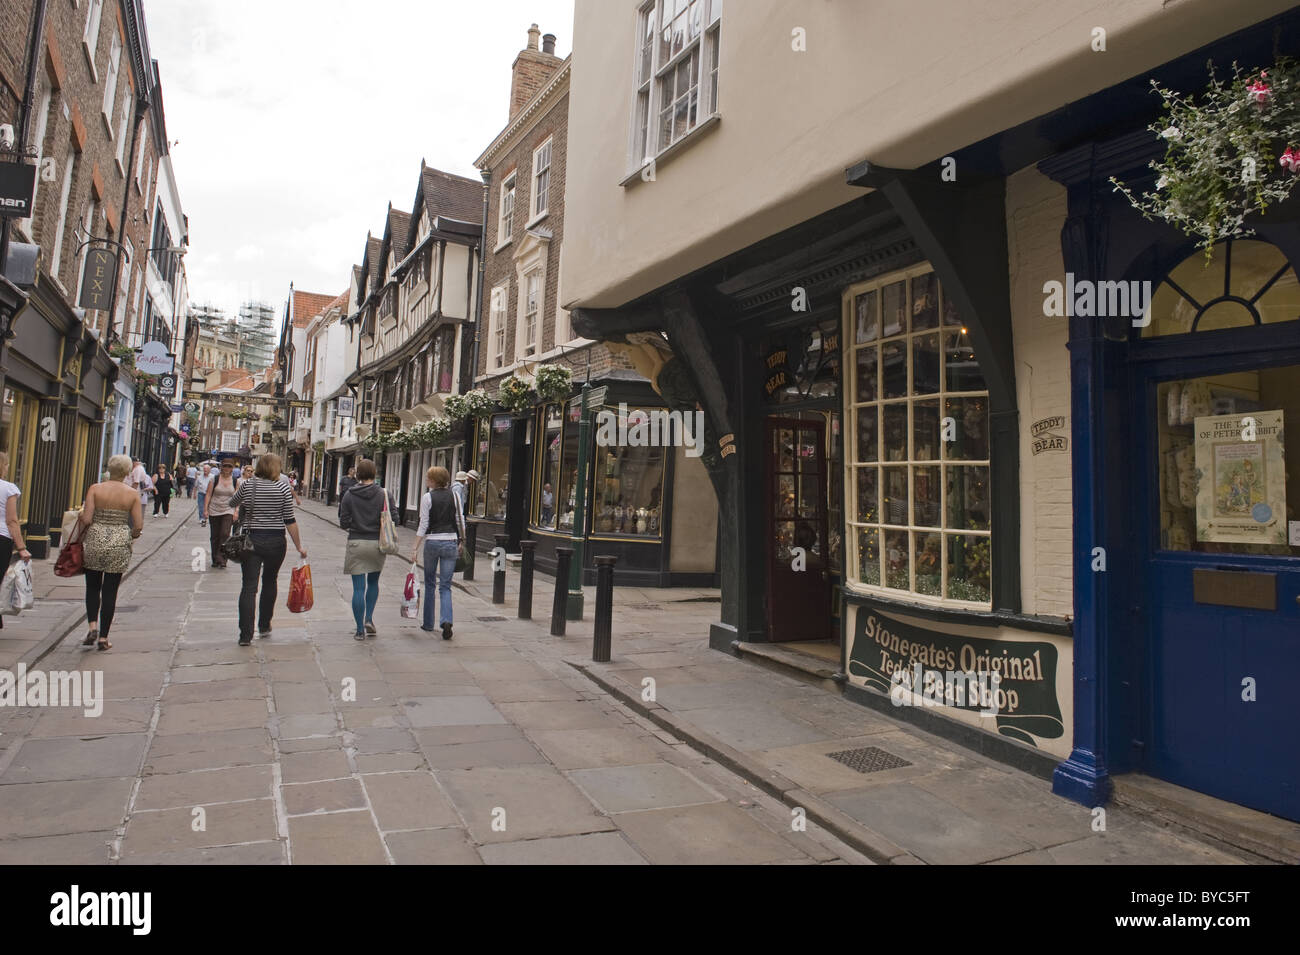 A view looking down Medieval Stonegate, York. Stock Photo